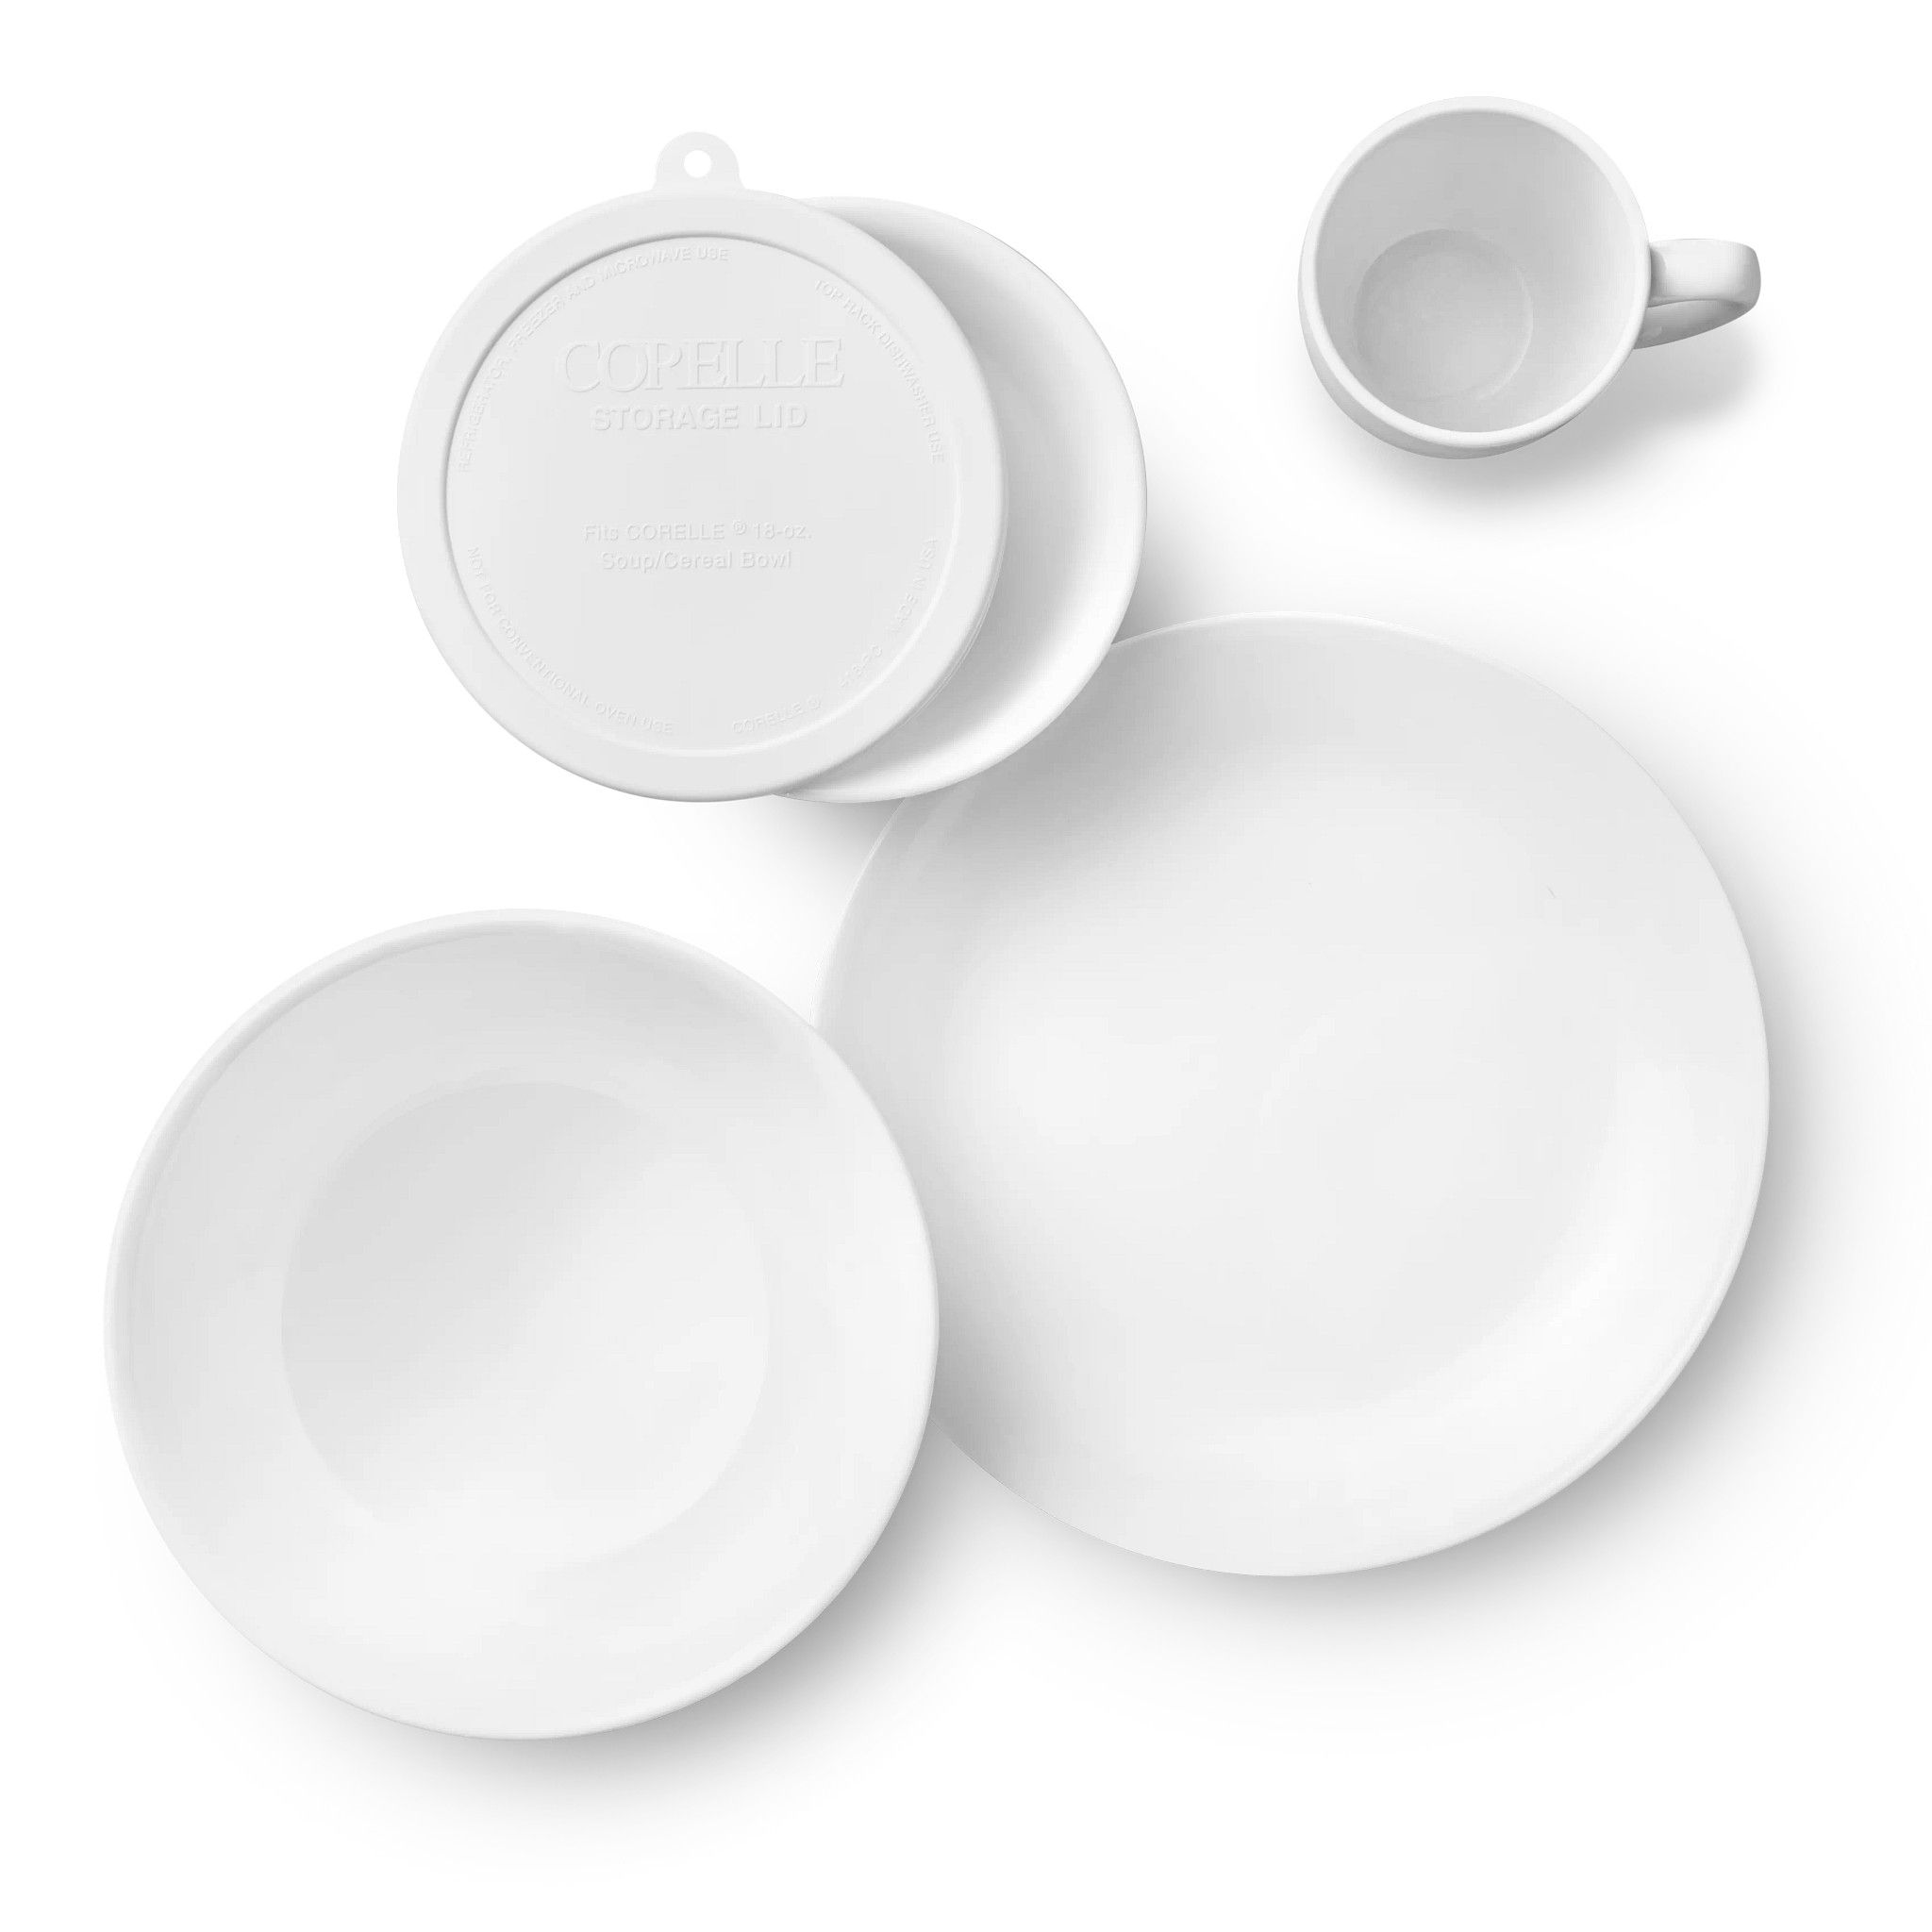 Corelle Winter Frost White 22-pc Dinnerware Set, Service for 5 - image 5 of 5